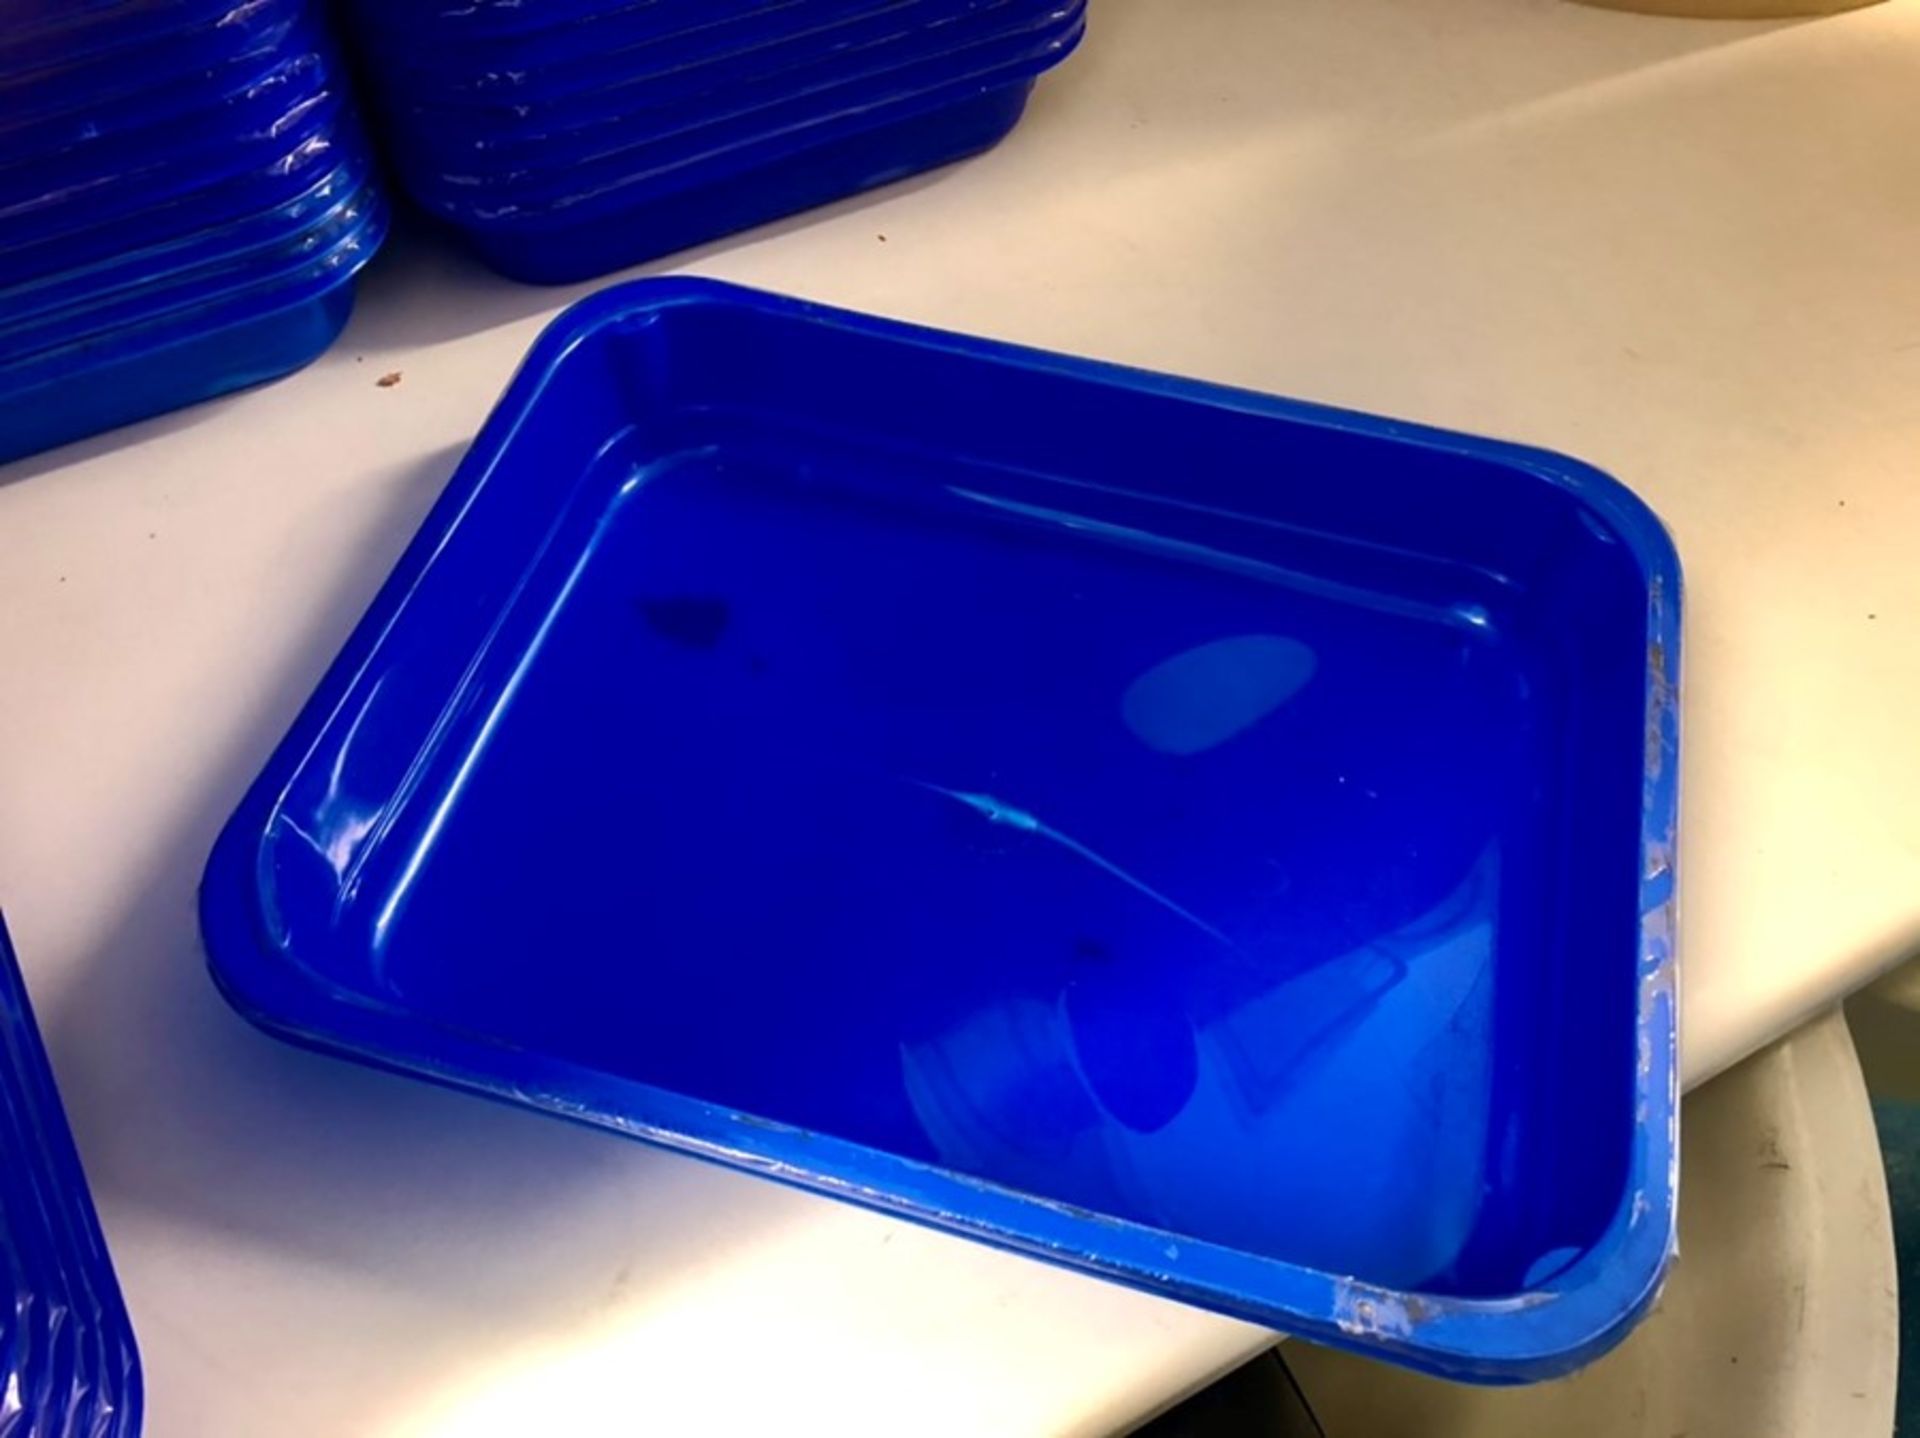 Approximately 230 small blue product trays